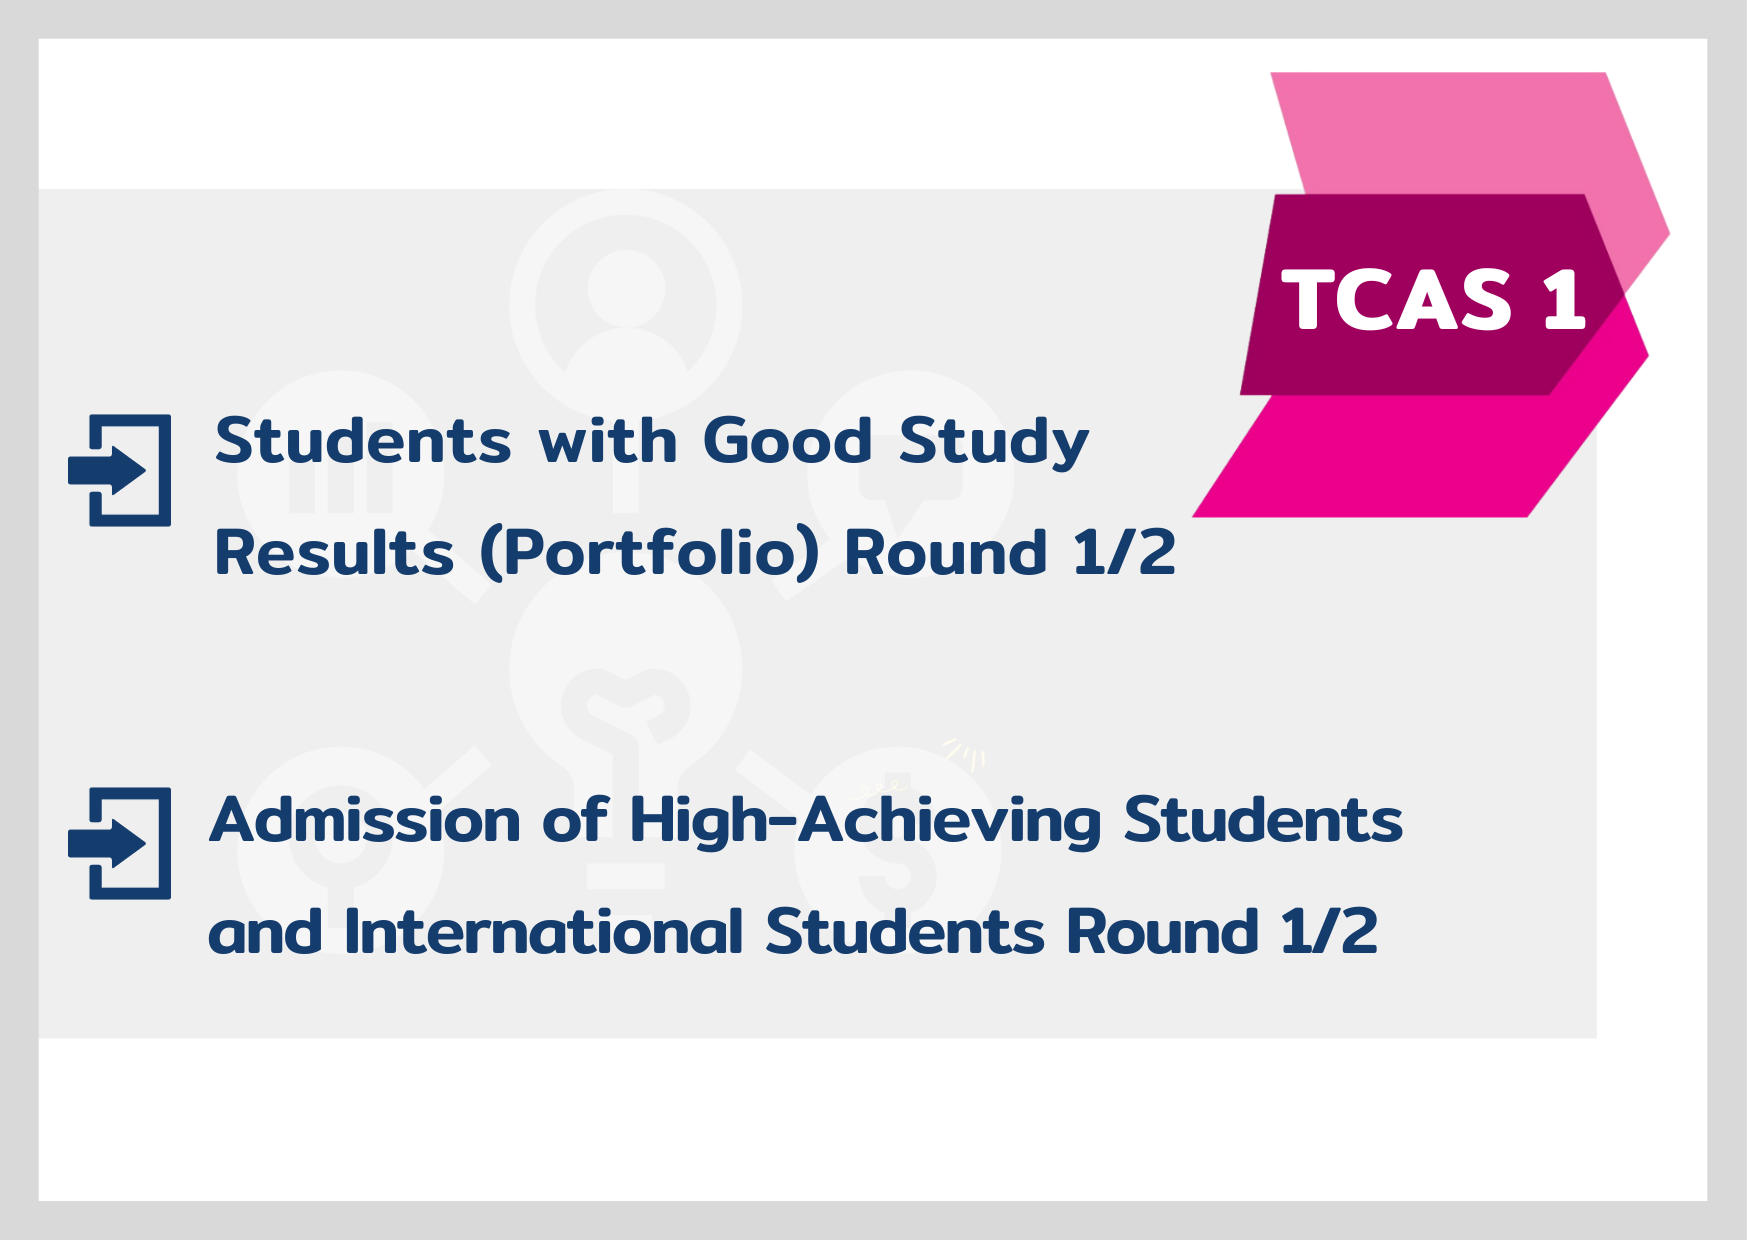 APPLICATION FOR TCAS 1 (ENGLISH PROFICIENCY) FOR ACADEMIC YEAR